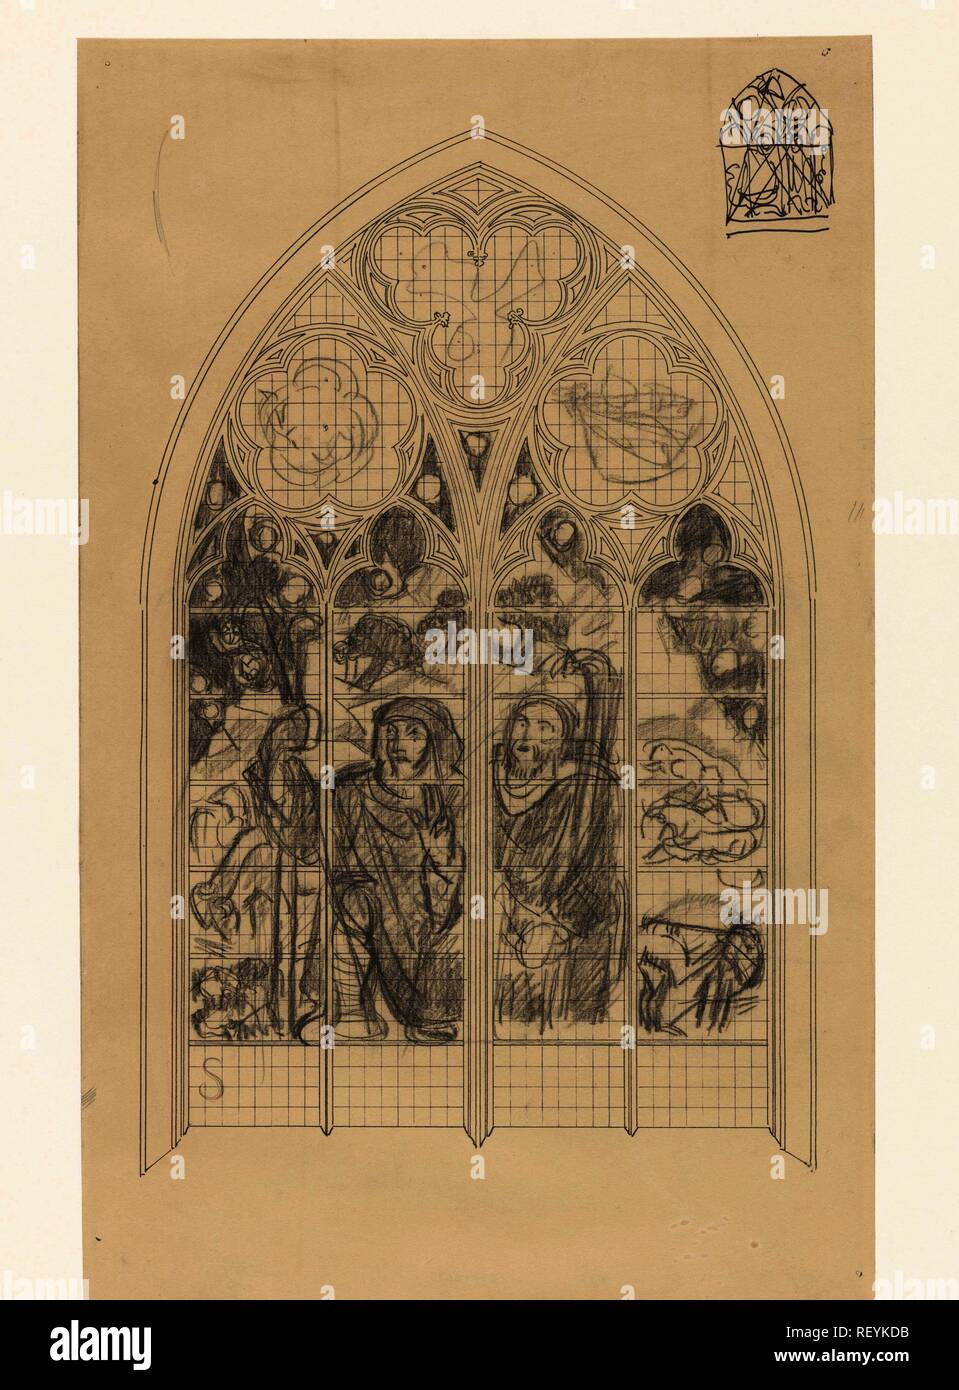 Design for a window in the Frederik van Sierck chapel in the Dom in Utrecht: the proclamation to the shepherds. Draughtsman: Richard Roland Holst. Dating: 1878 - 1938. Measurements: h 445 mm × w 275 mm. Museum: Rijksmuseum, Amsterdam. Stock Photo